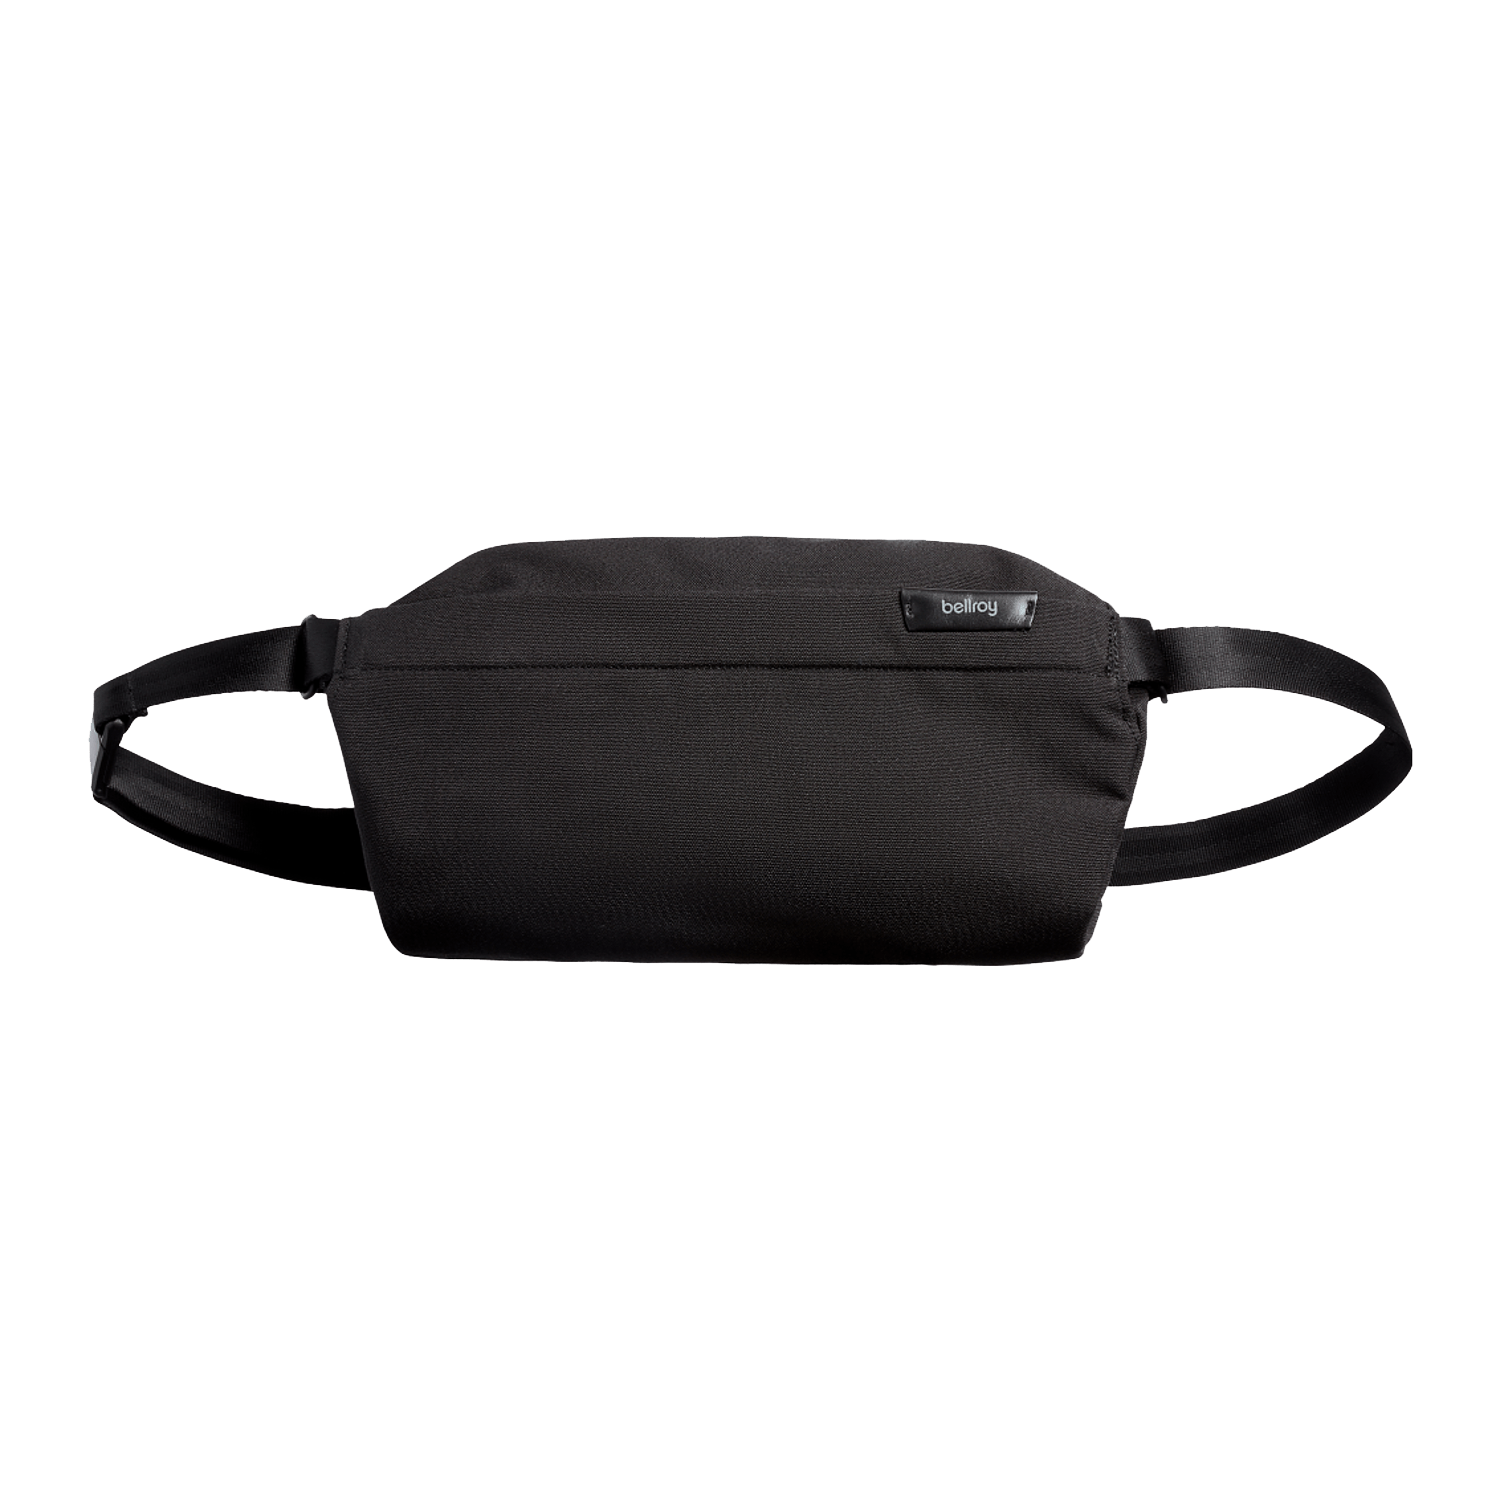 Bellroy Market Tote | The Accessory You Didn't Know You Needed